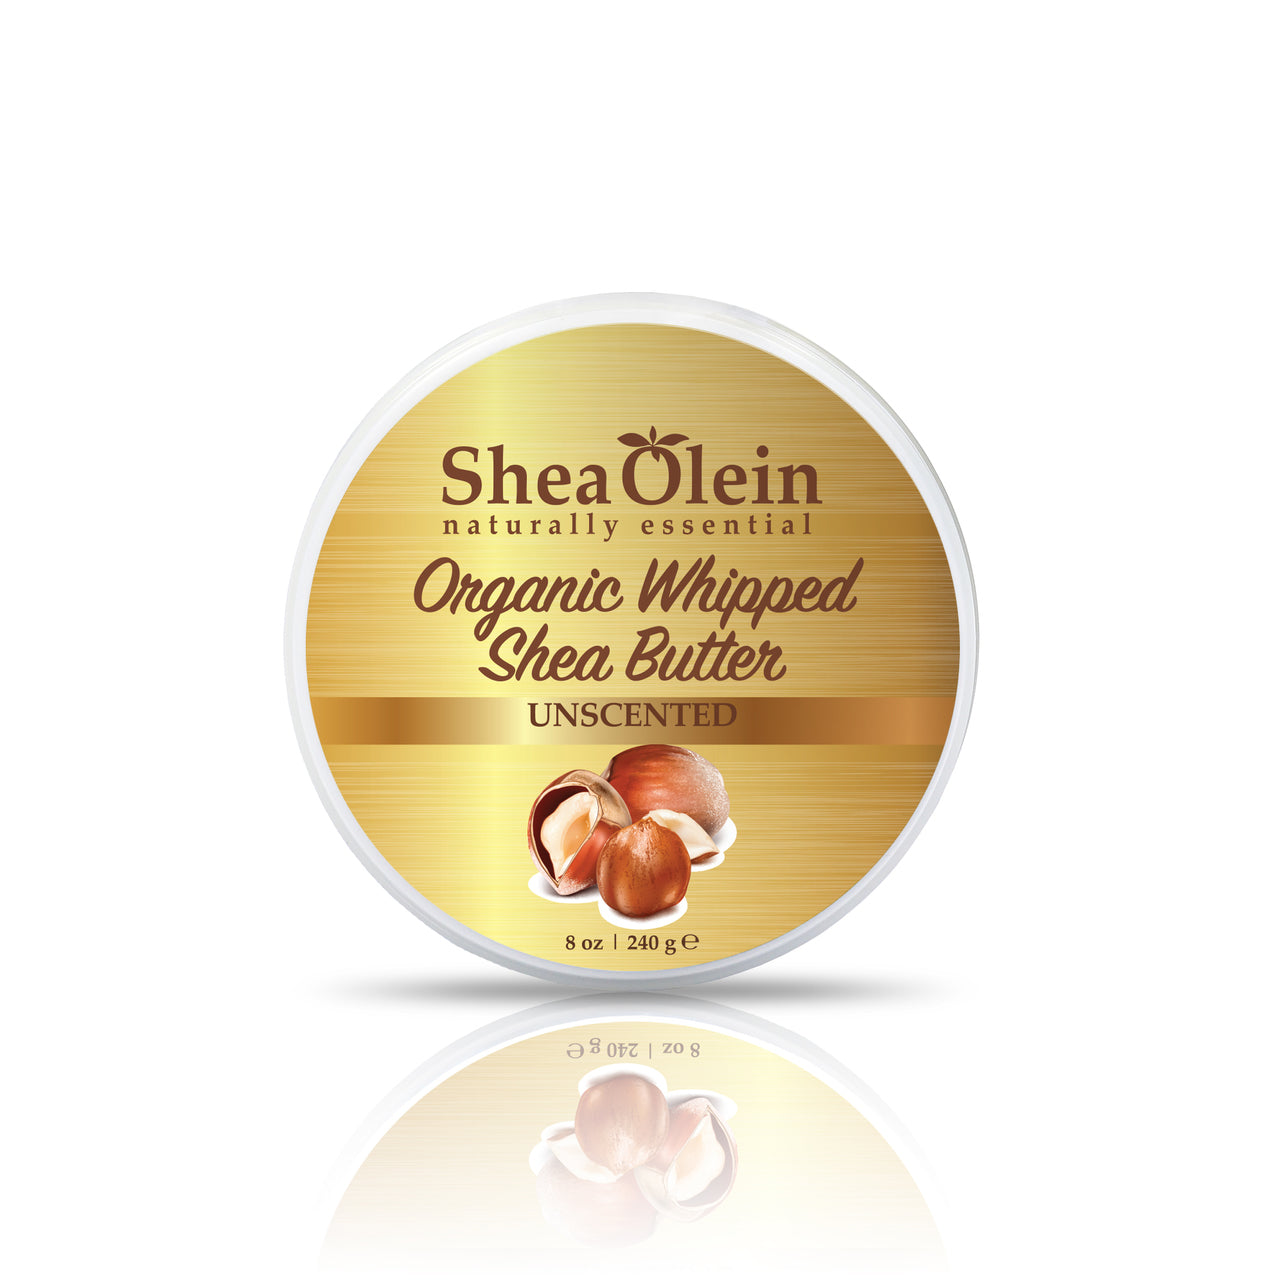 Unscented Organic Whipped Shea Butter